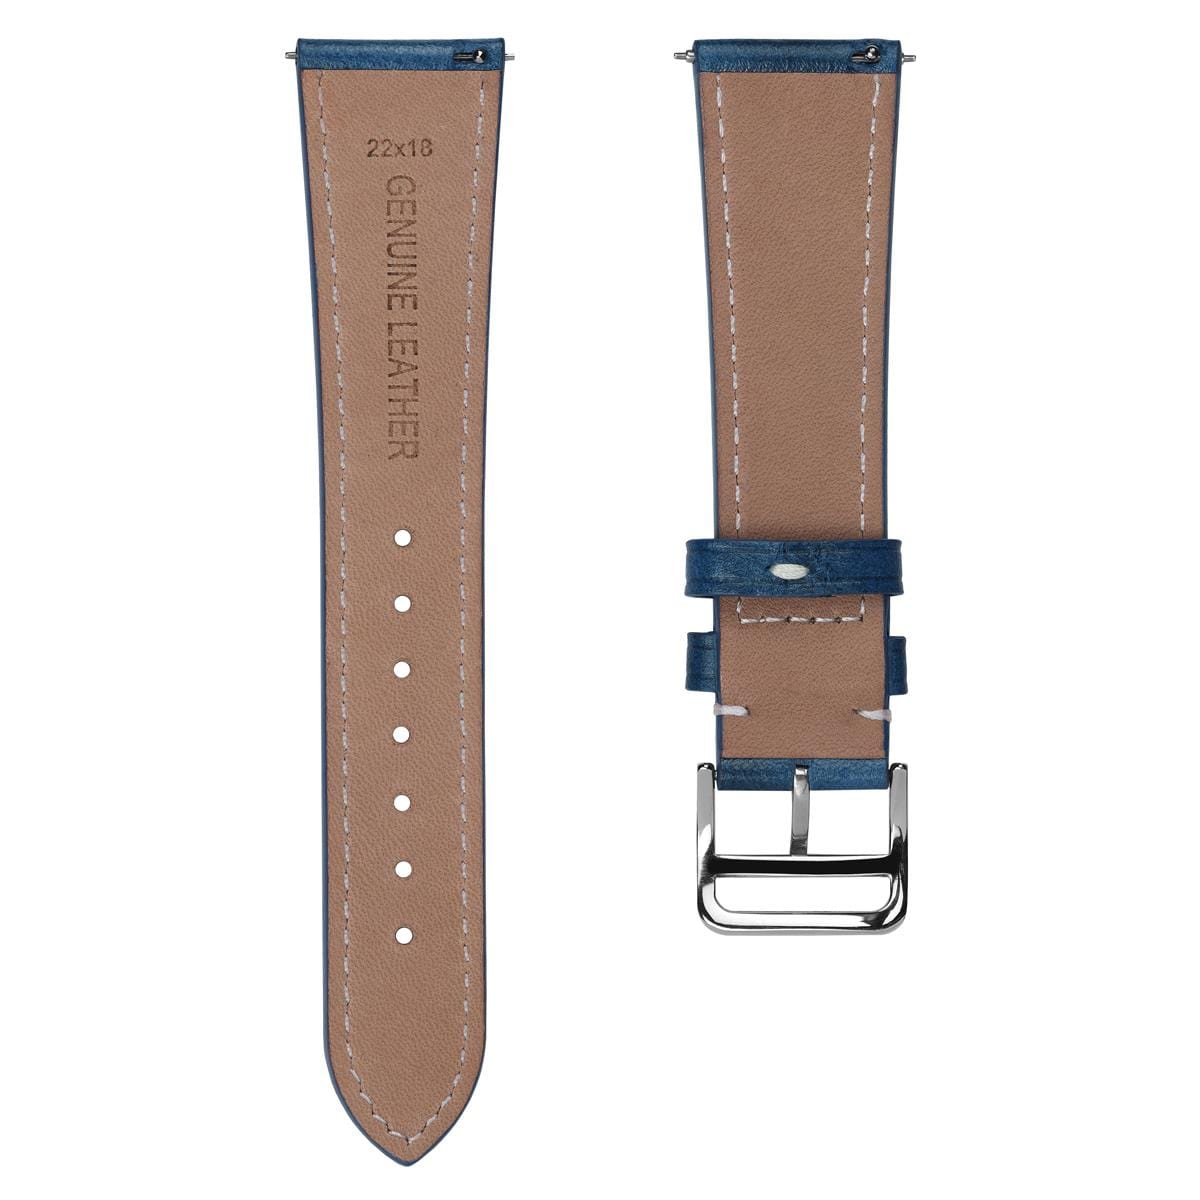 Brixham Special Buckle Classic Leather Watch Strap - Blue